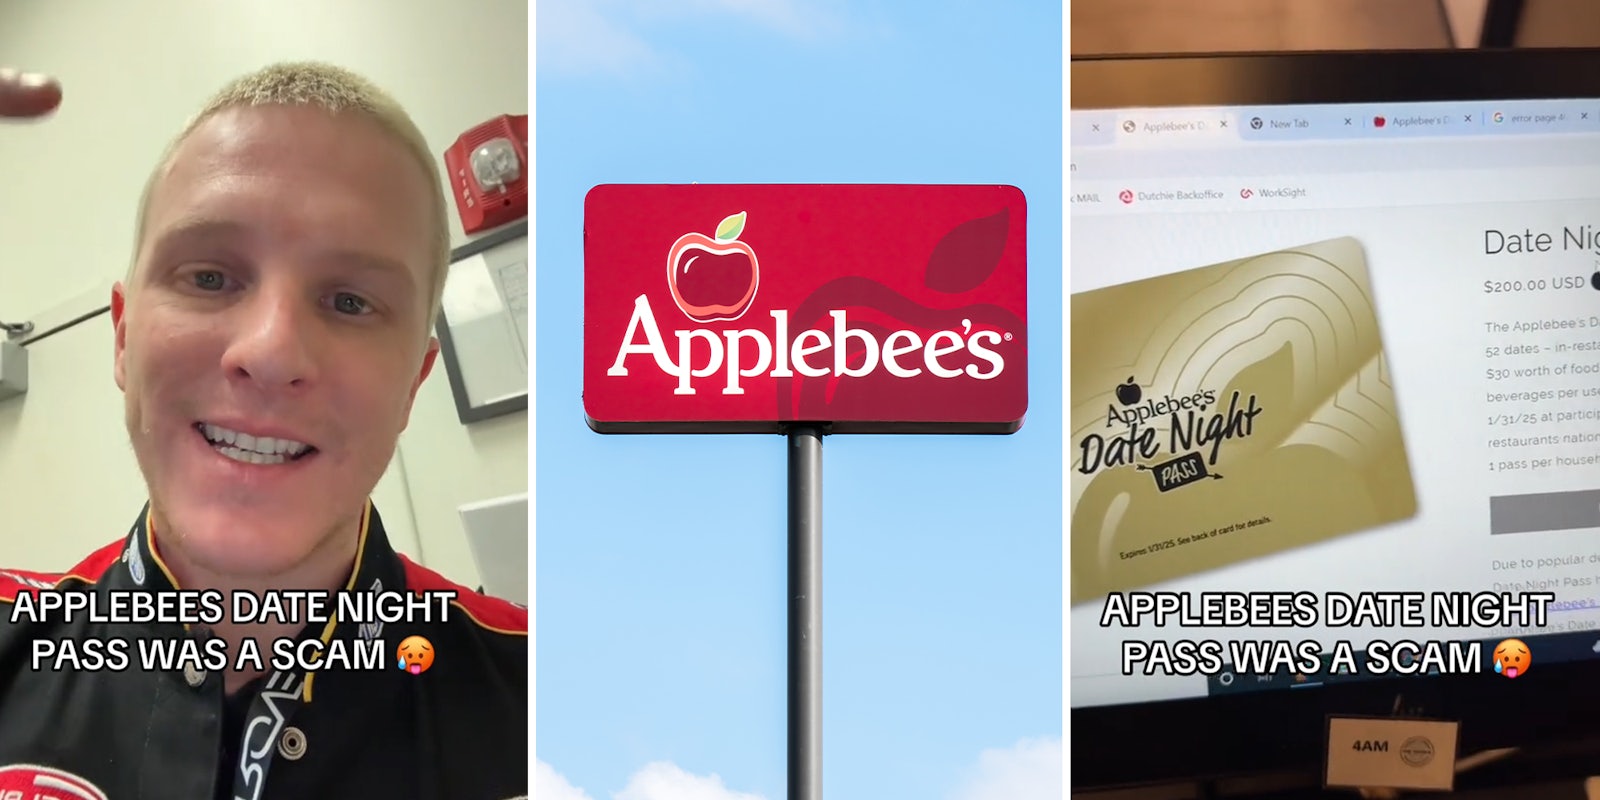 Applebee's just offered $1,560 worth of food for $200